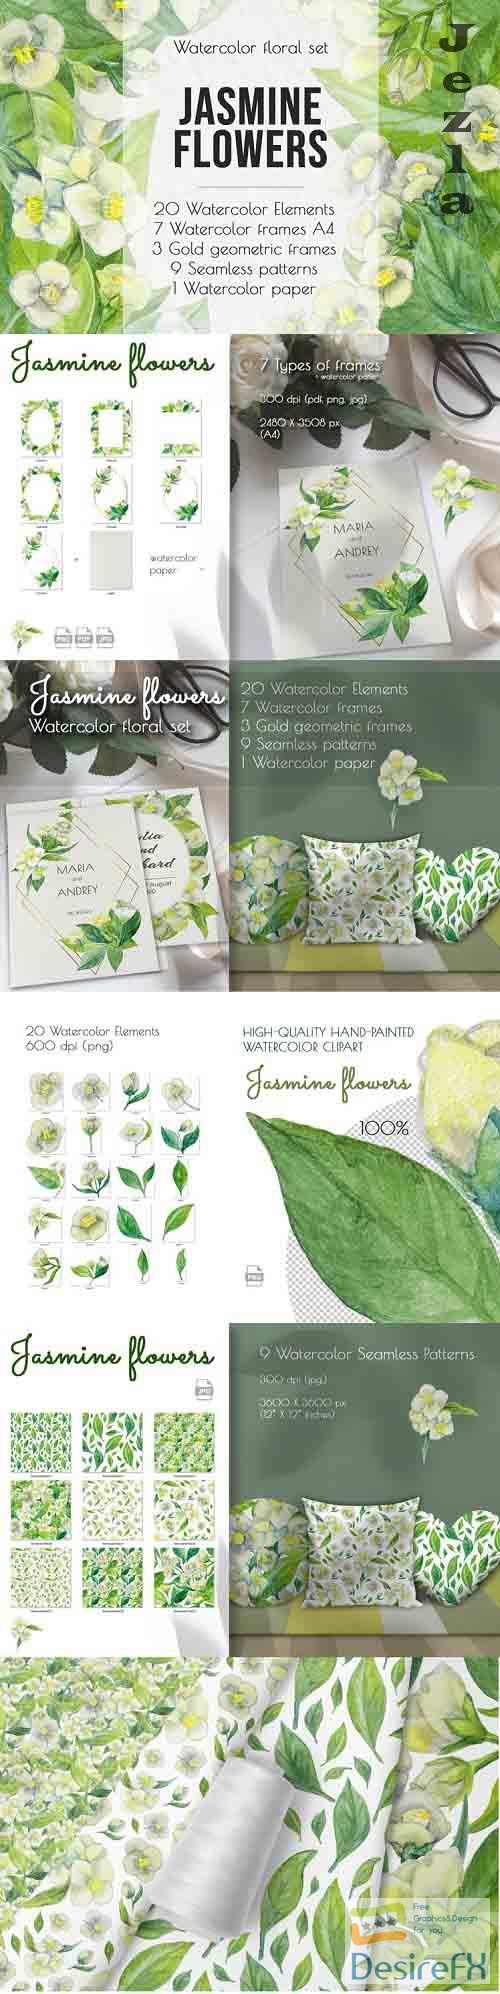 Jasmine flowers and leaves. Watercolor clip art - 864260